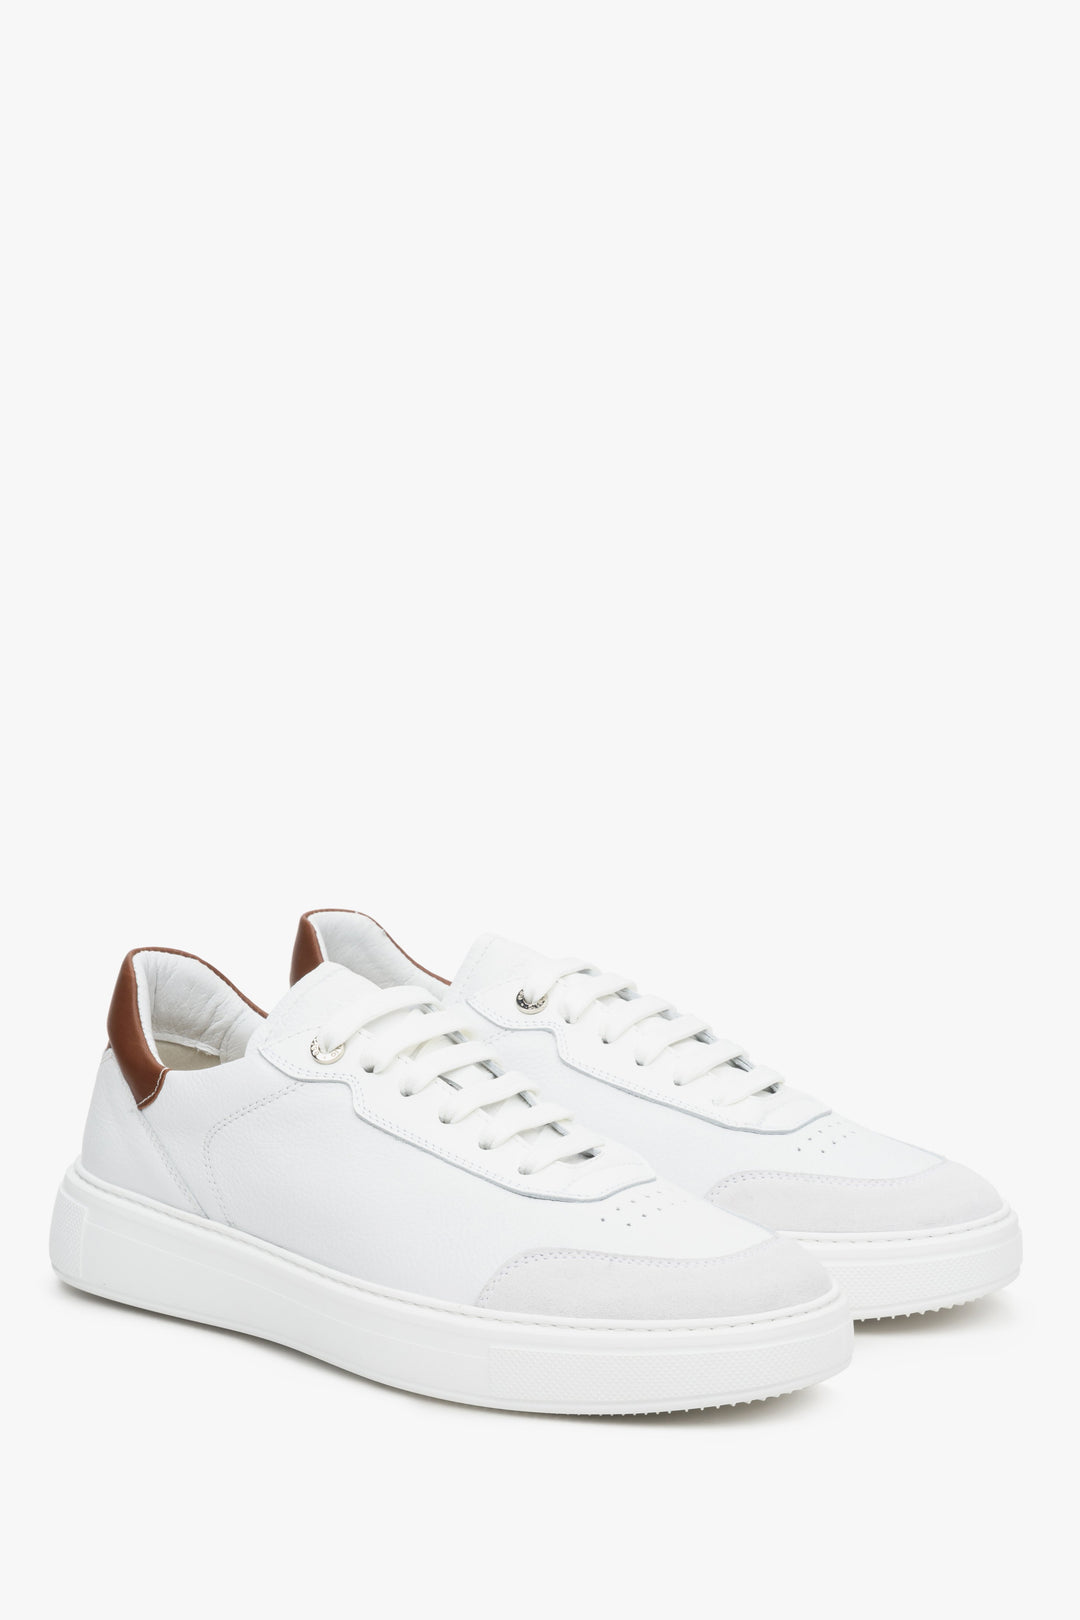 White leather men's sneakers with laces.